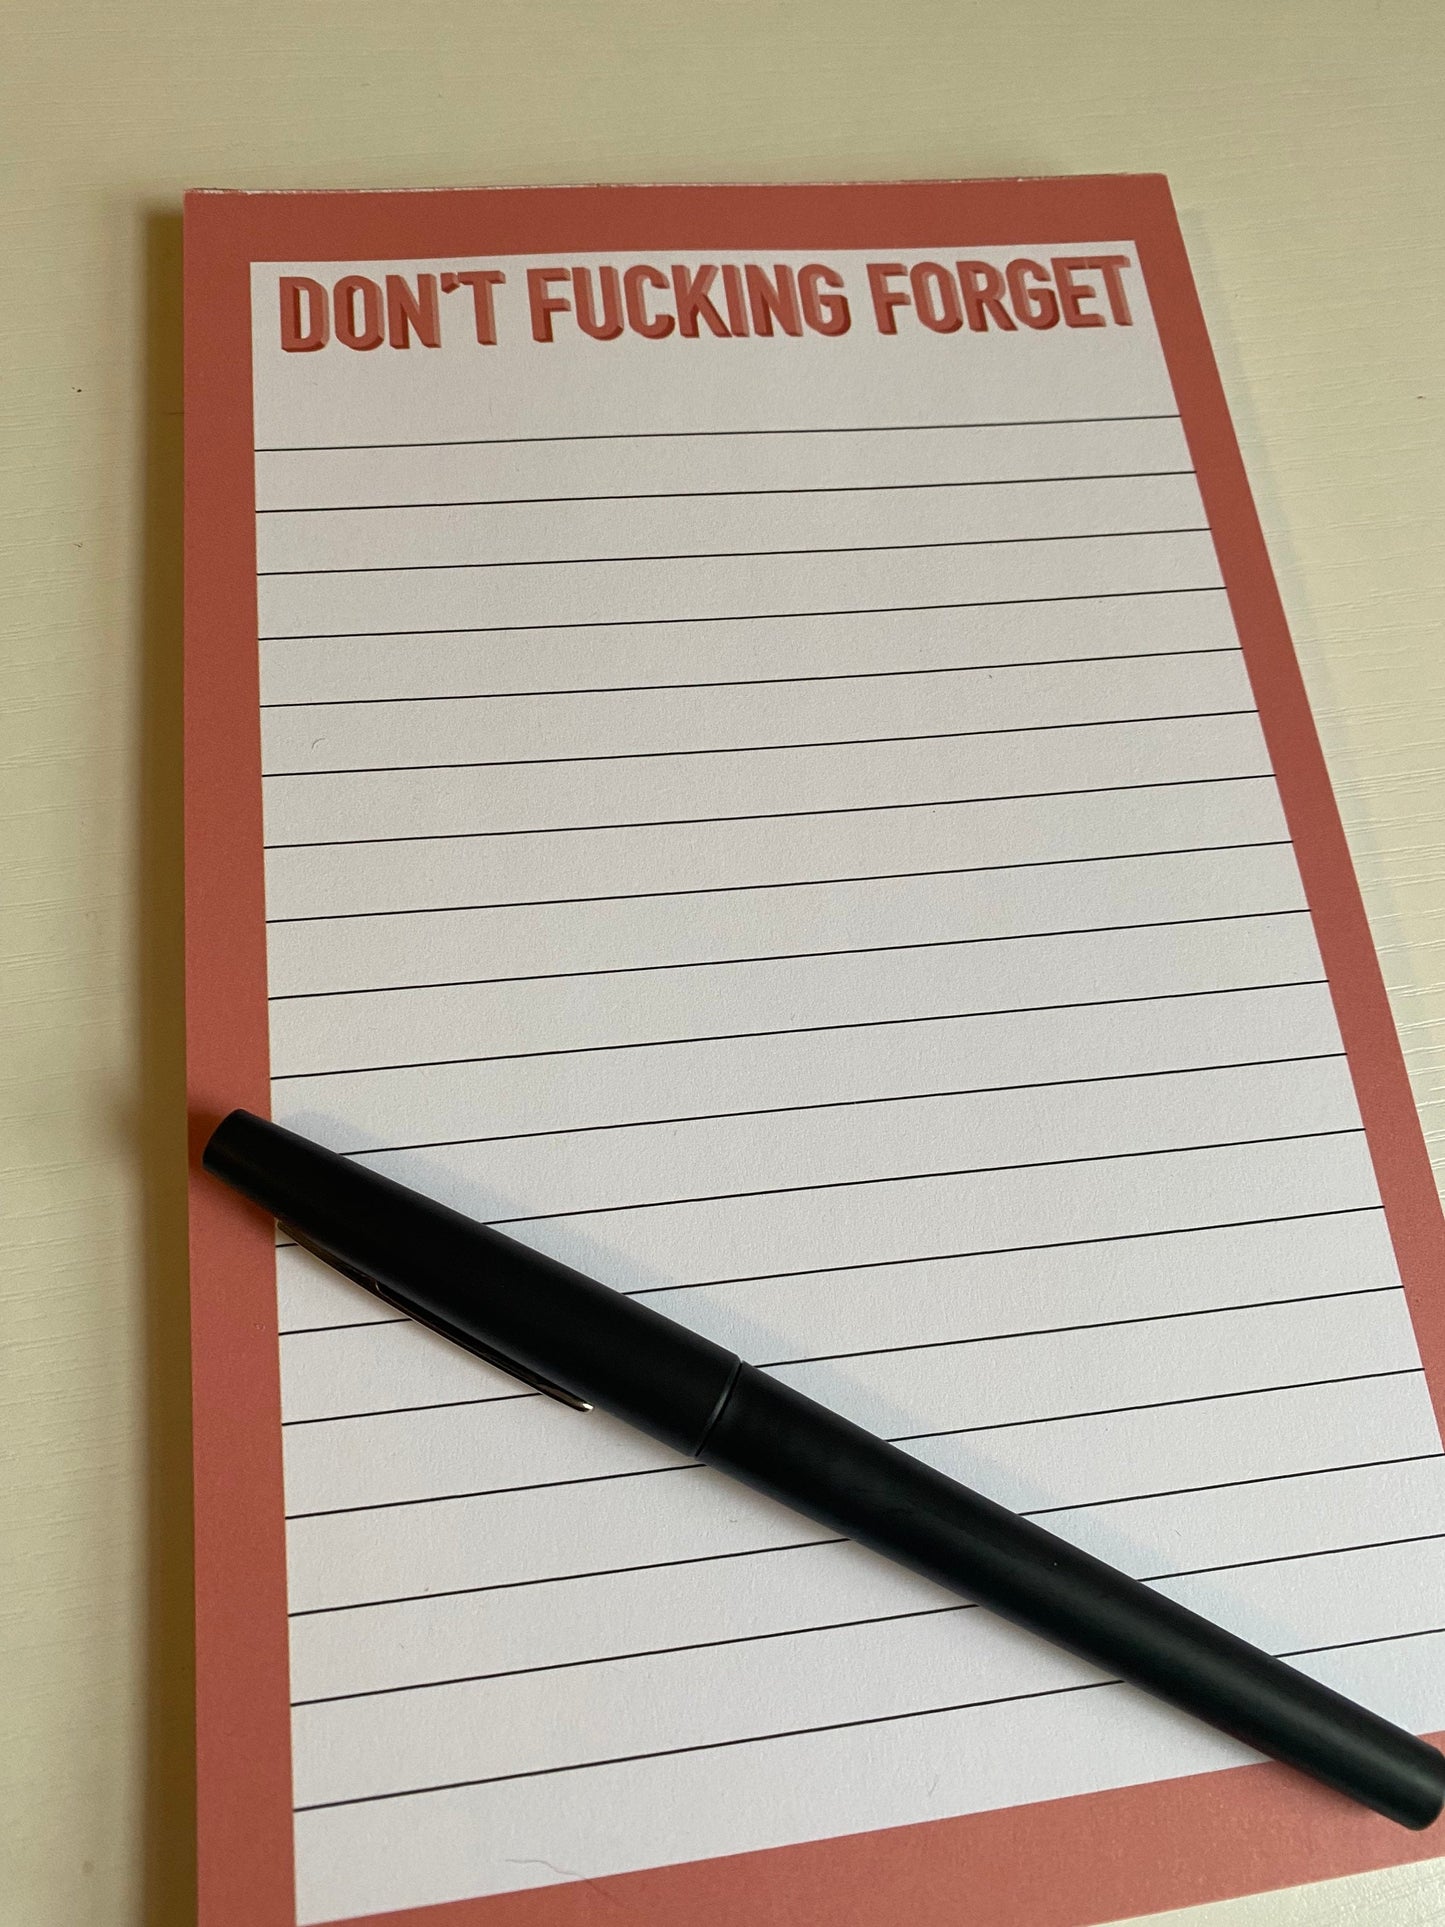 Don't F*CKING Forget Notepad, Explicit Stationary, Explicit Notebook, Don't Fucking forget To do list